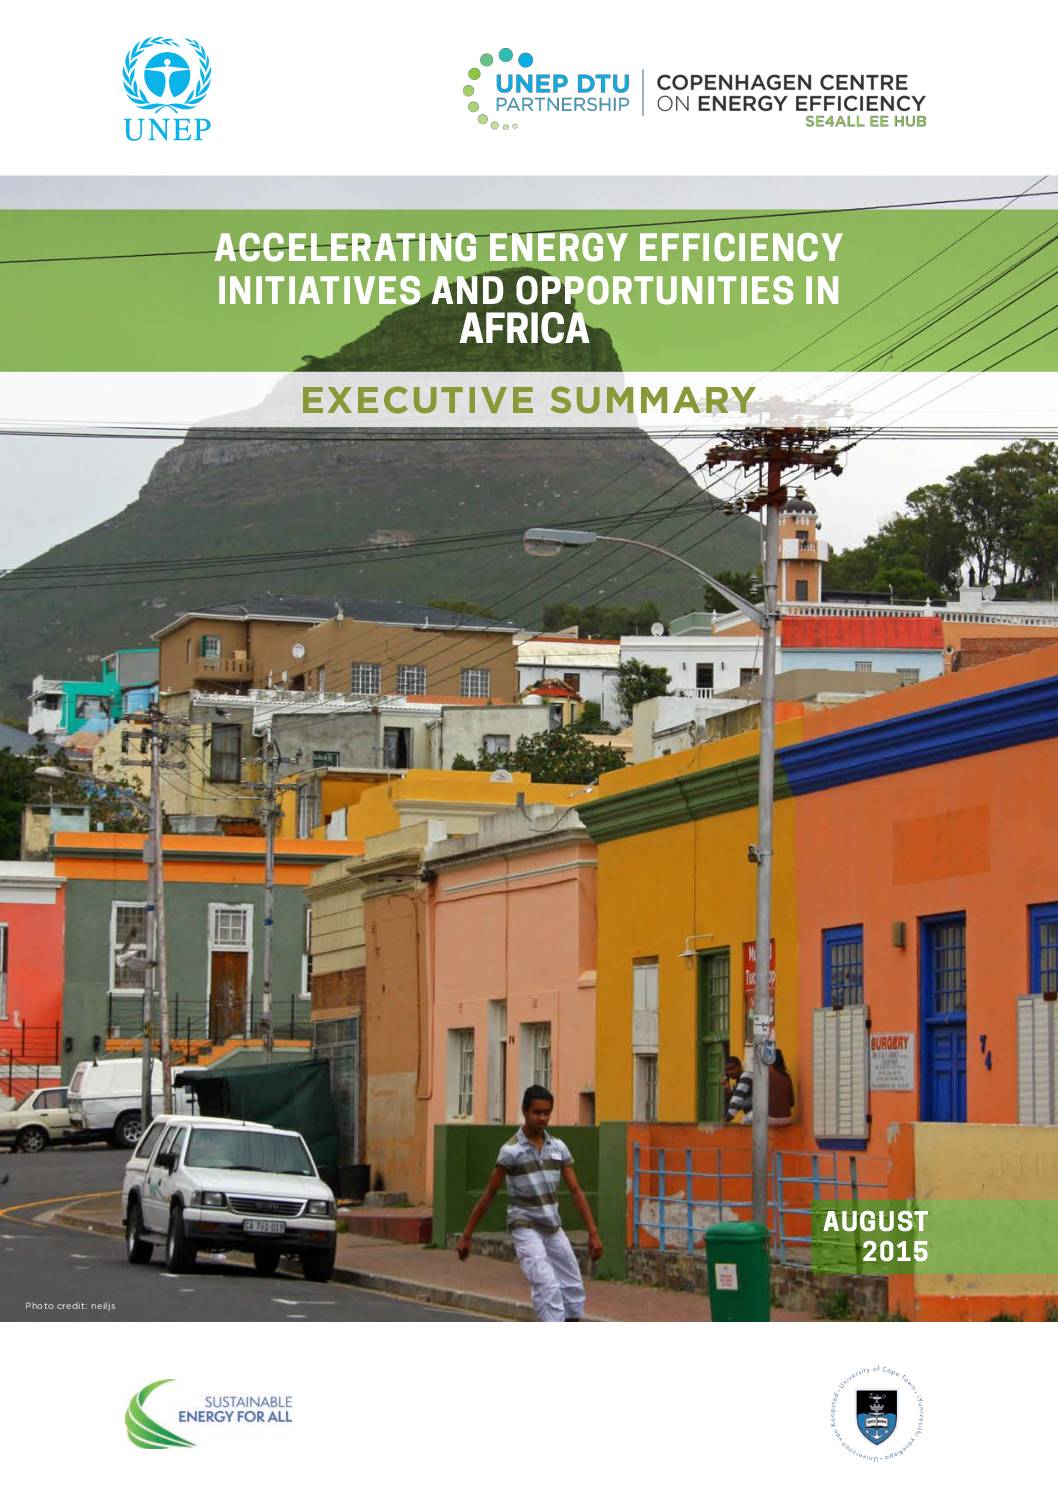 Executive Summary – Accelerating Energy Efficiency Initiatives in Africa